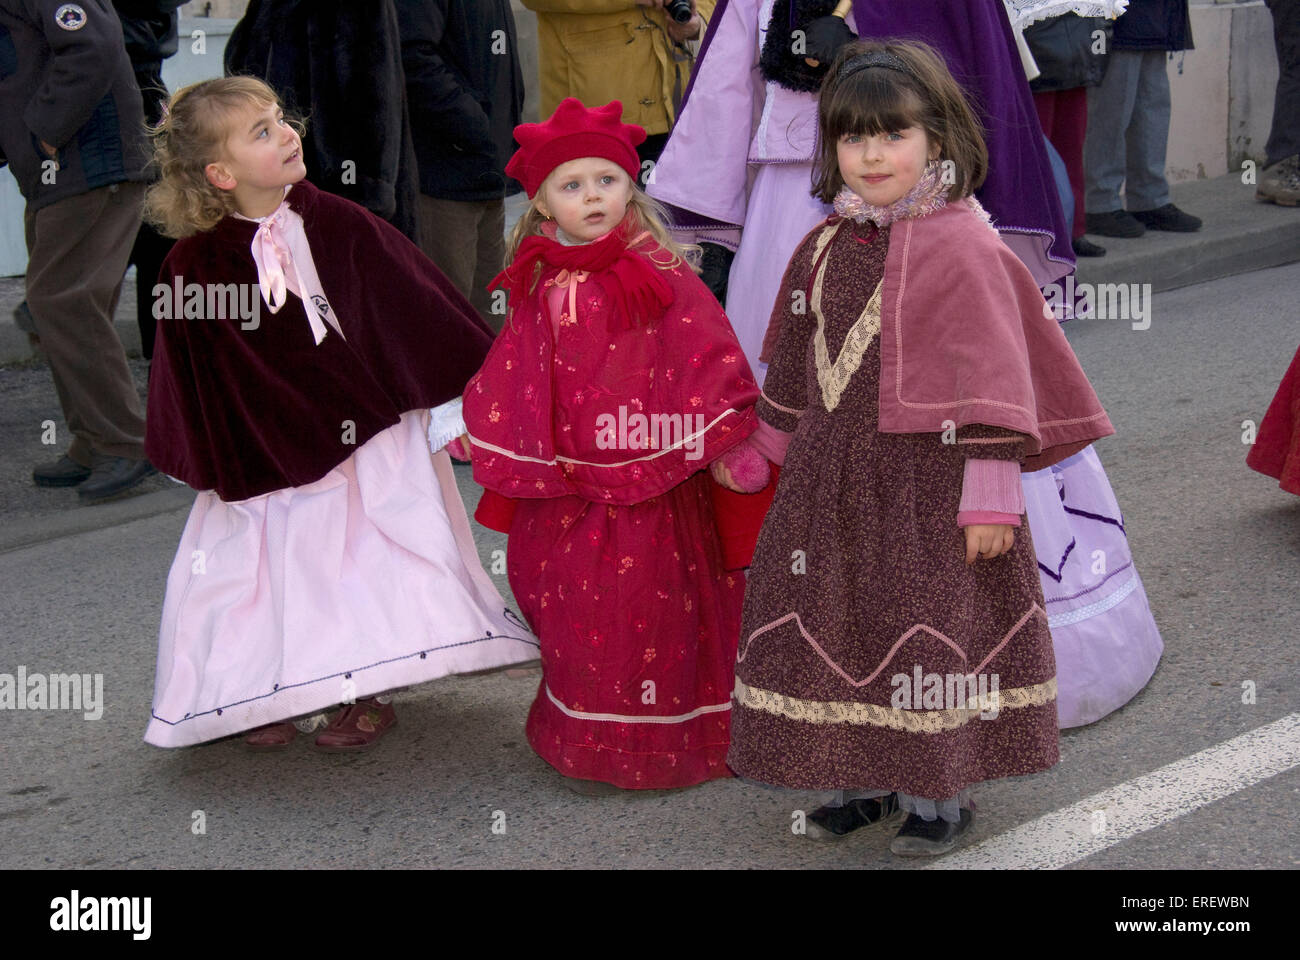 Three small girls in Victorian costumes taking part in a Valentine's Day parade in Roquemaure, South of France. Stock Photo